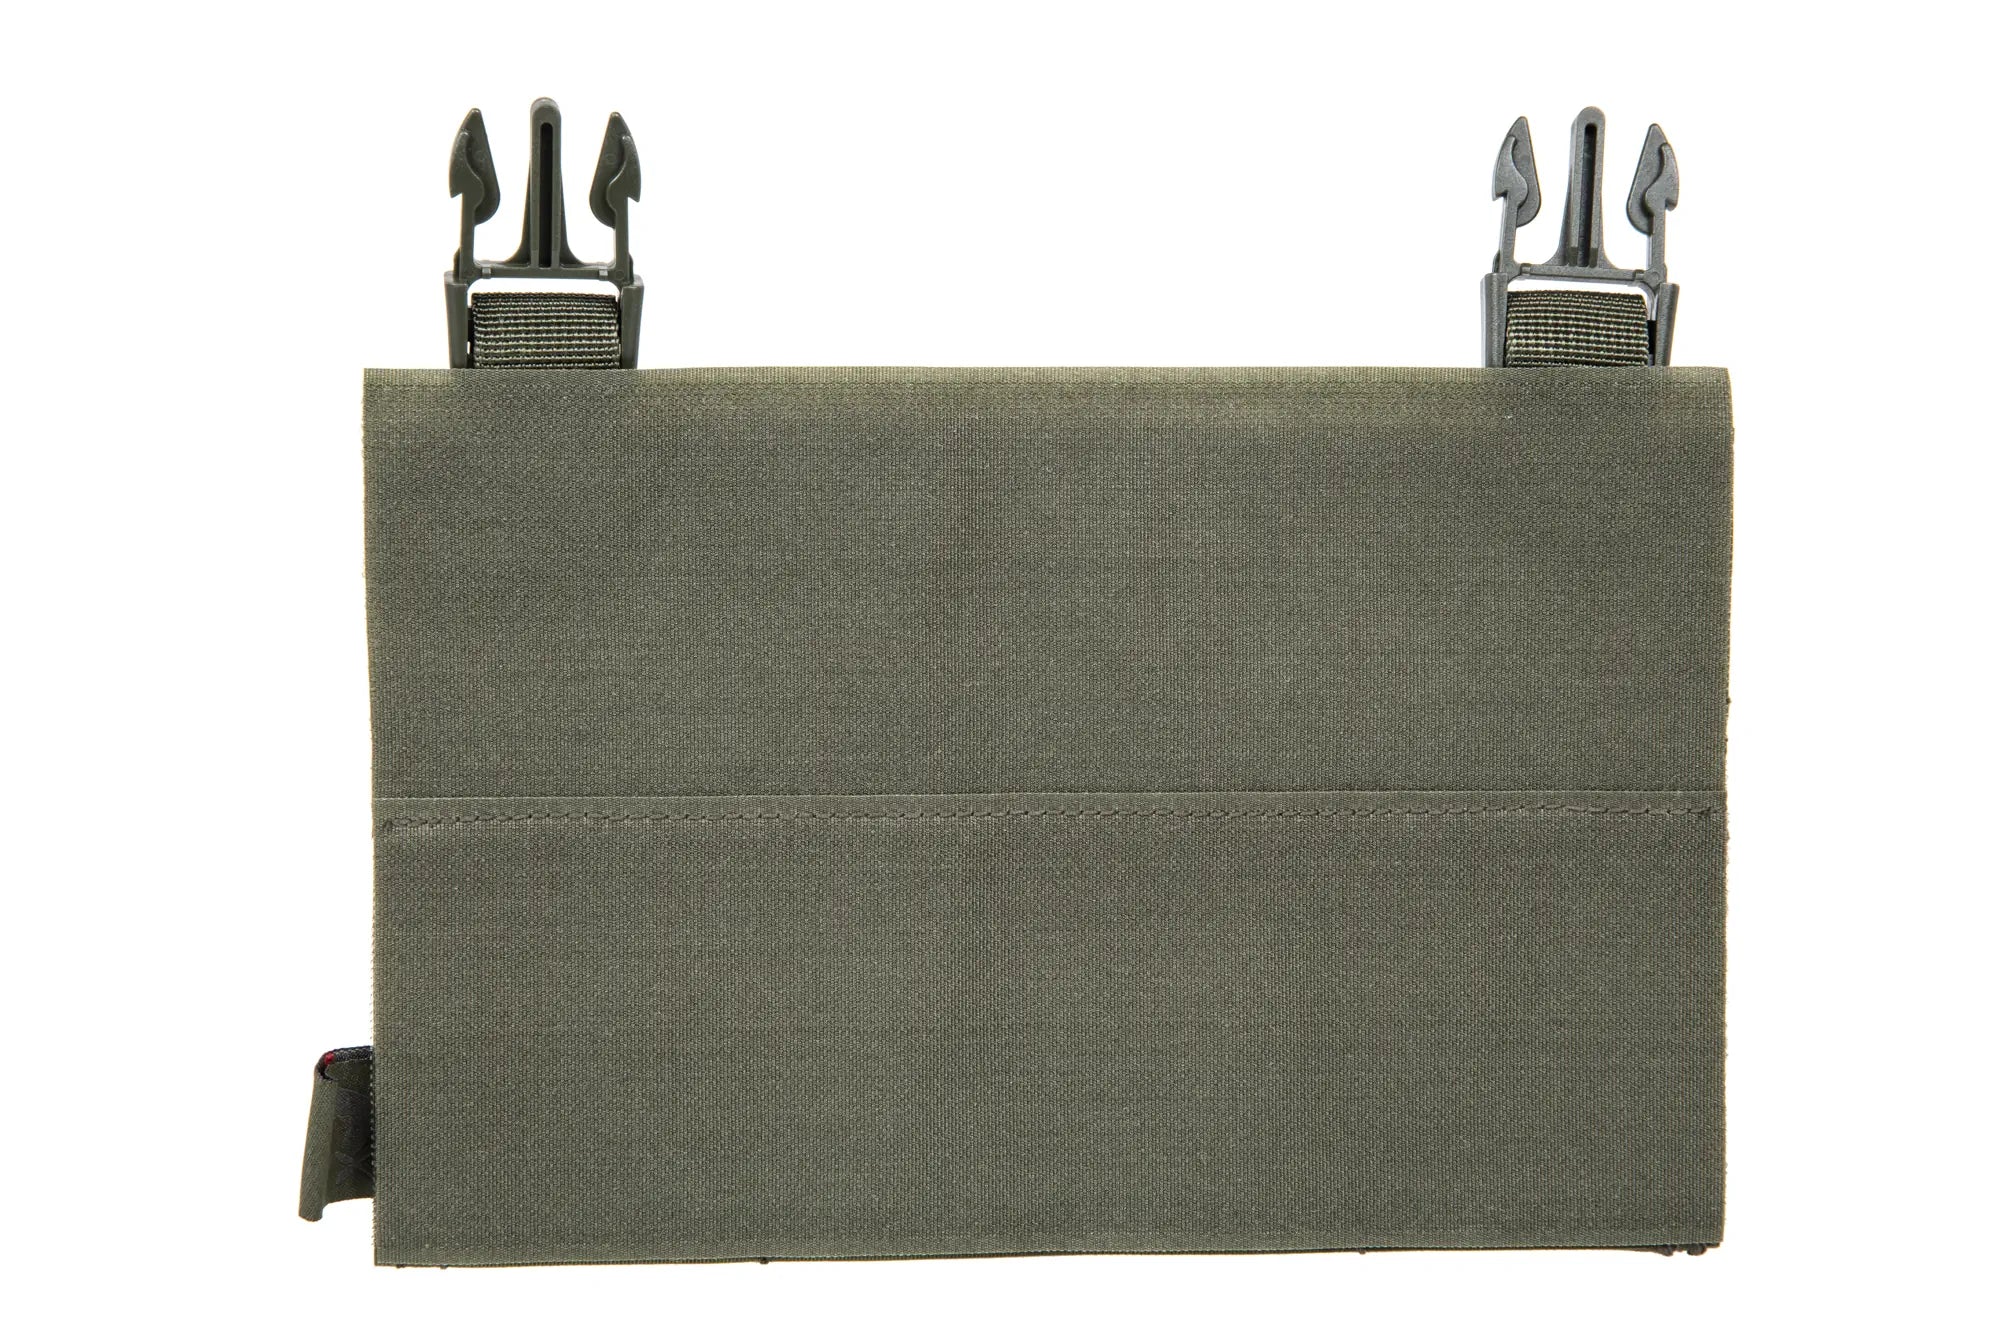 Viper Tactical VX buckle up panel for 4 PM magazines - Olive